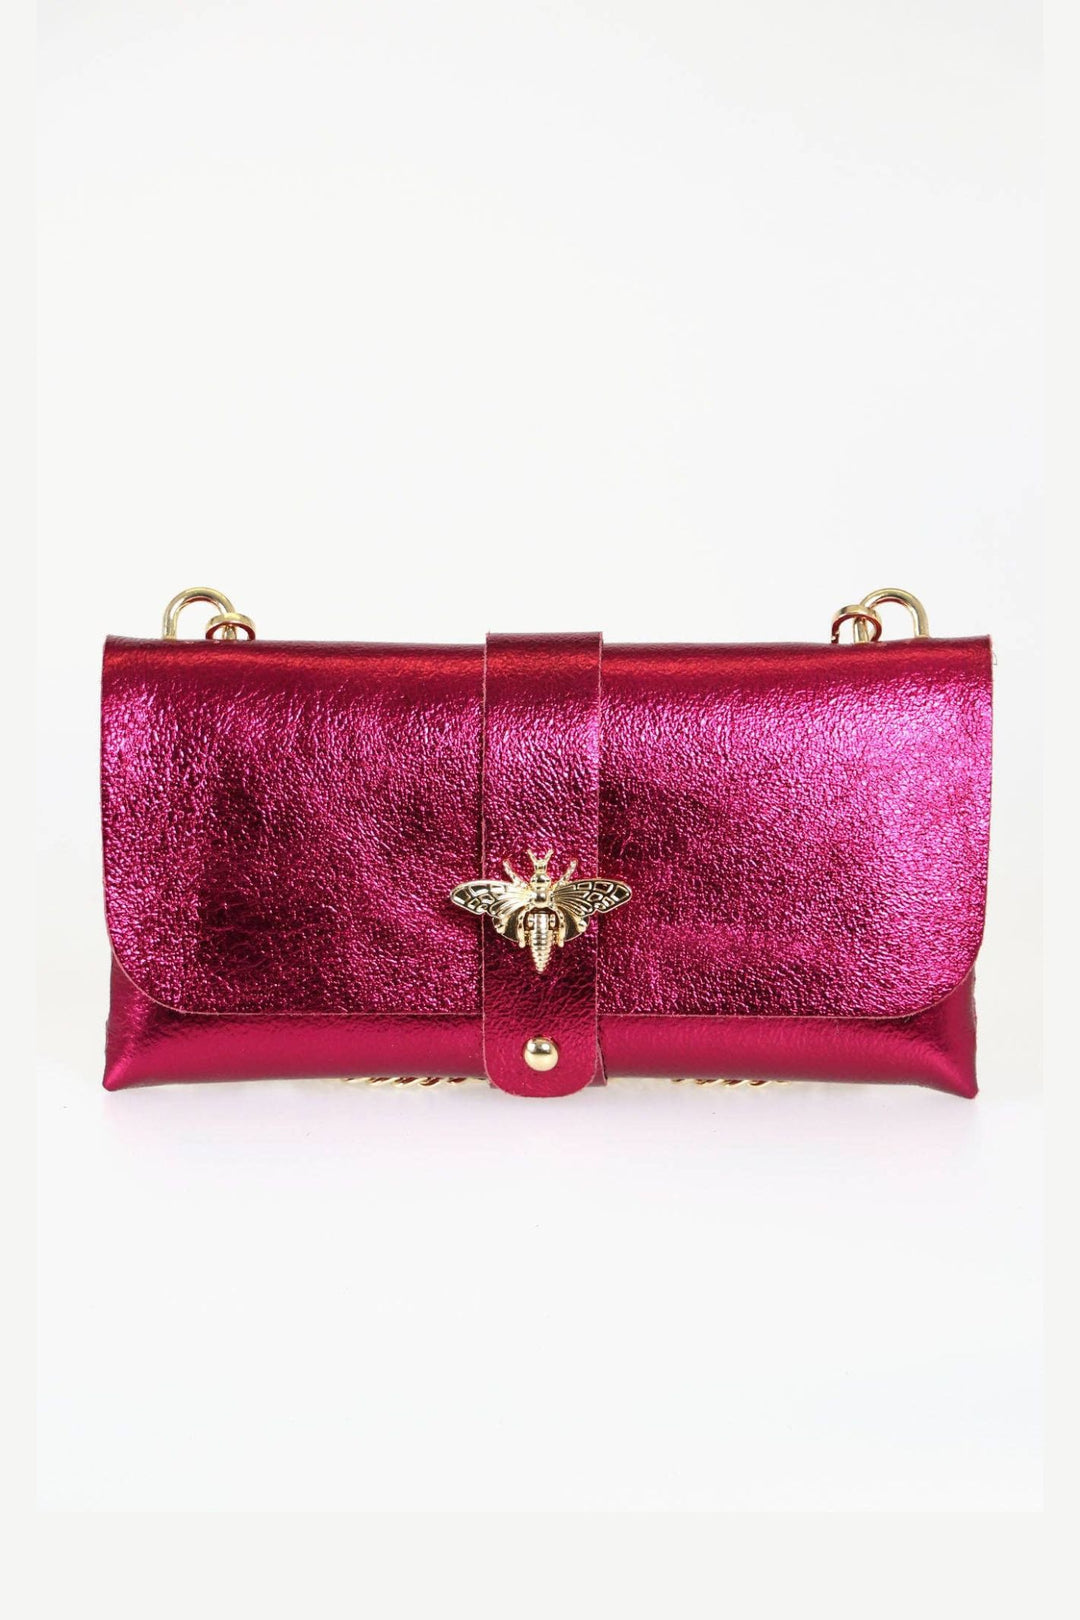 Magenta Bee Emblem Leather Clutch Bag with Gold Chain Strap